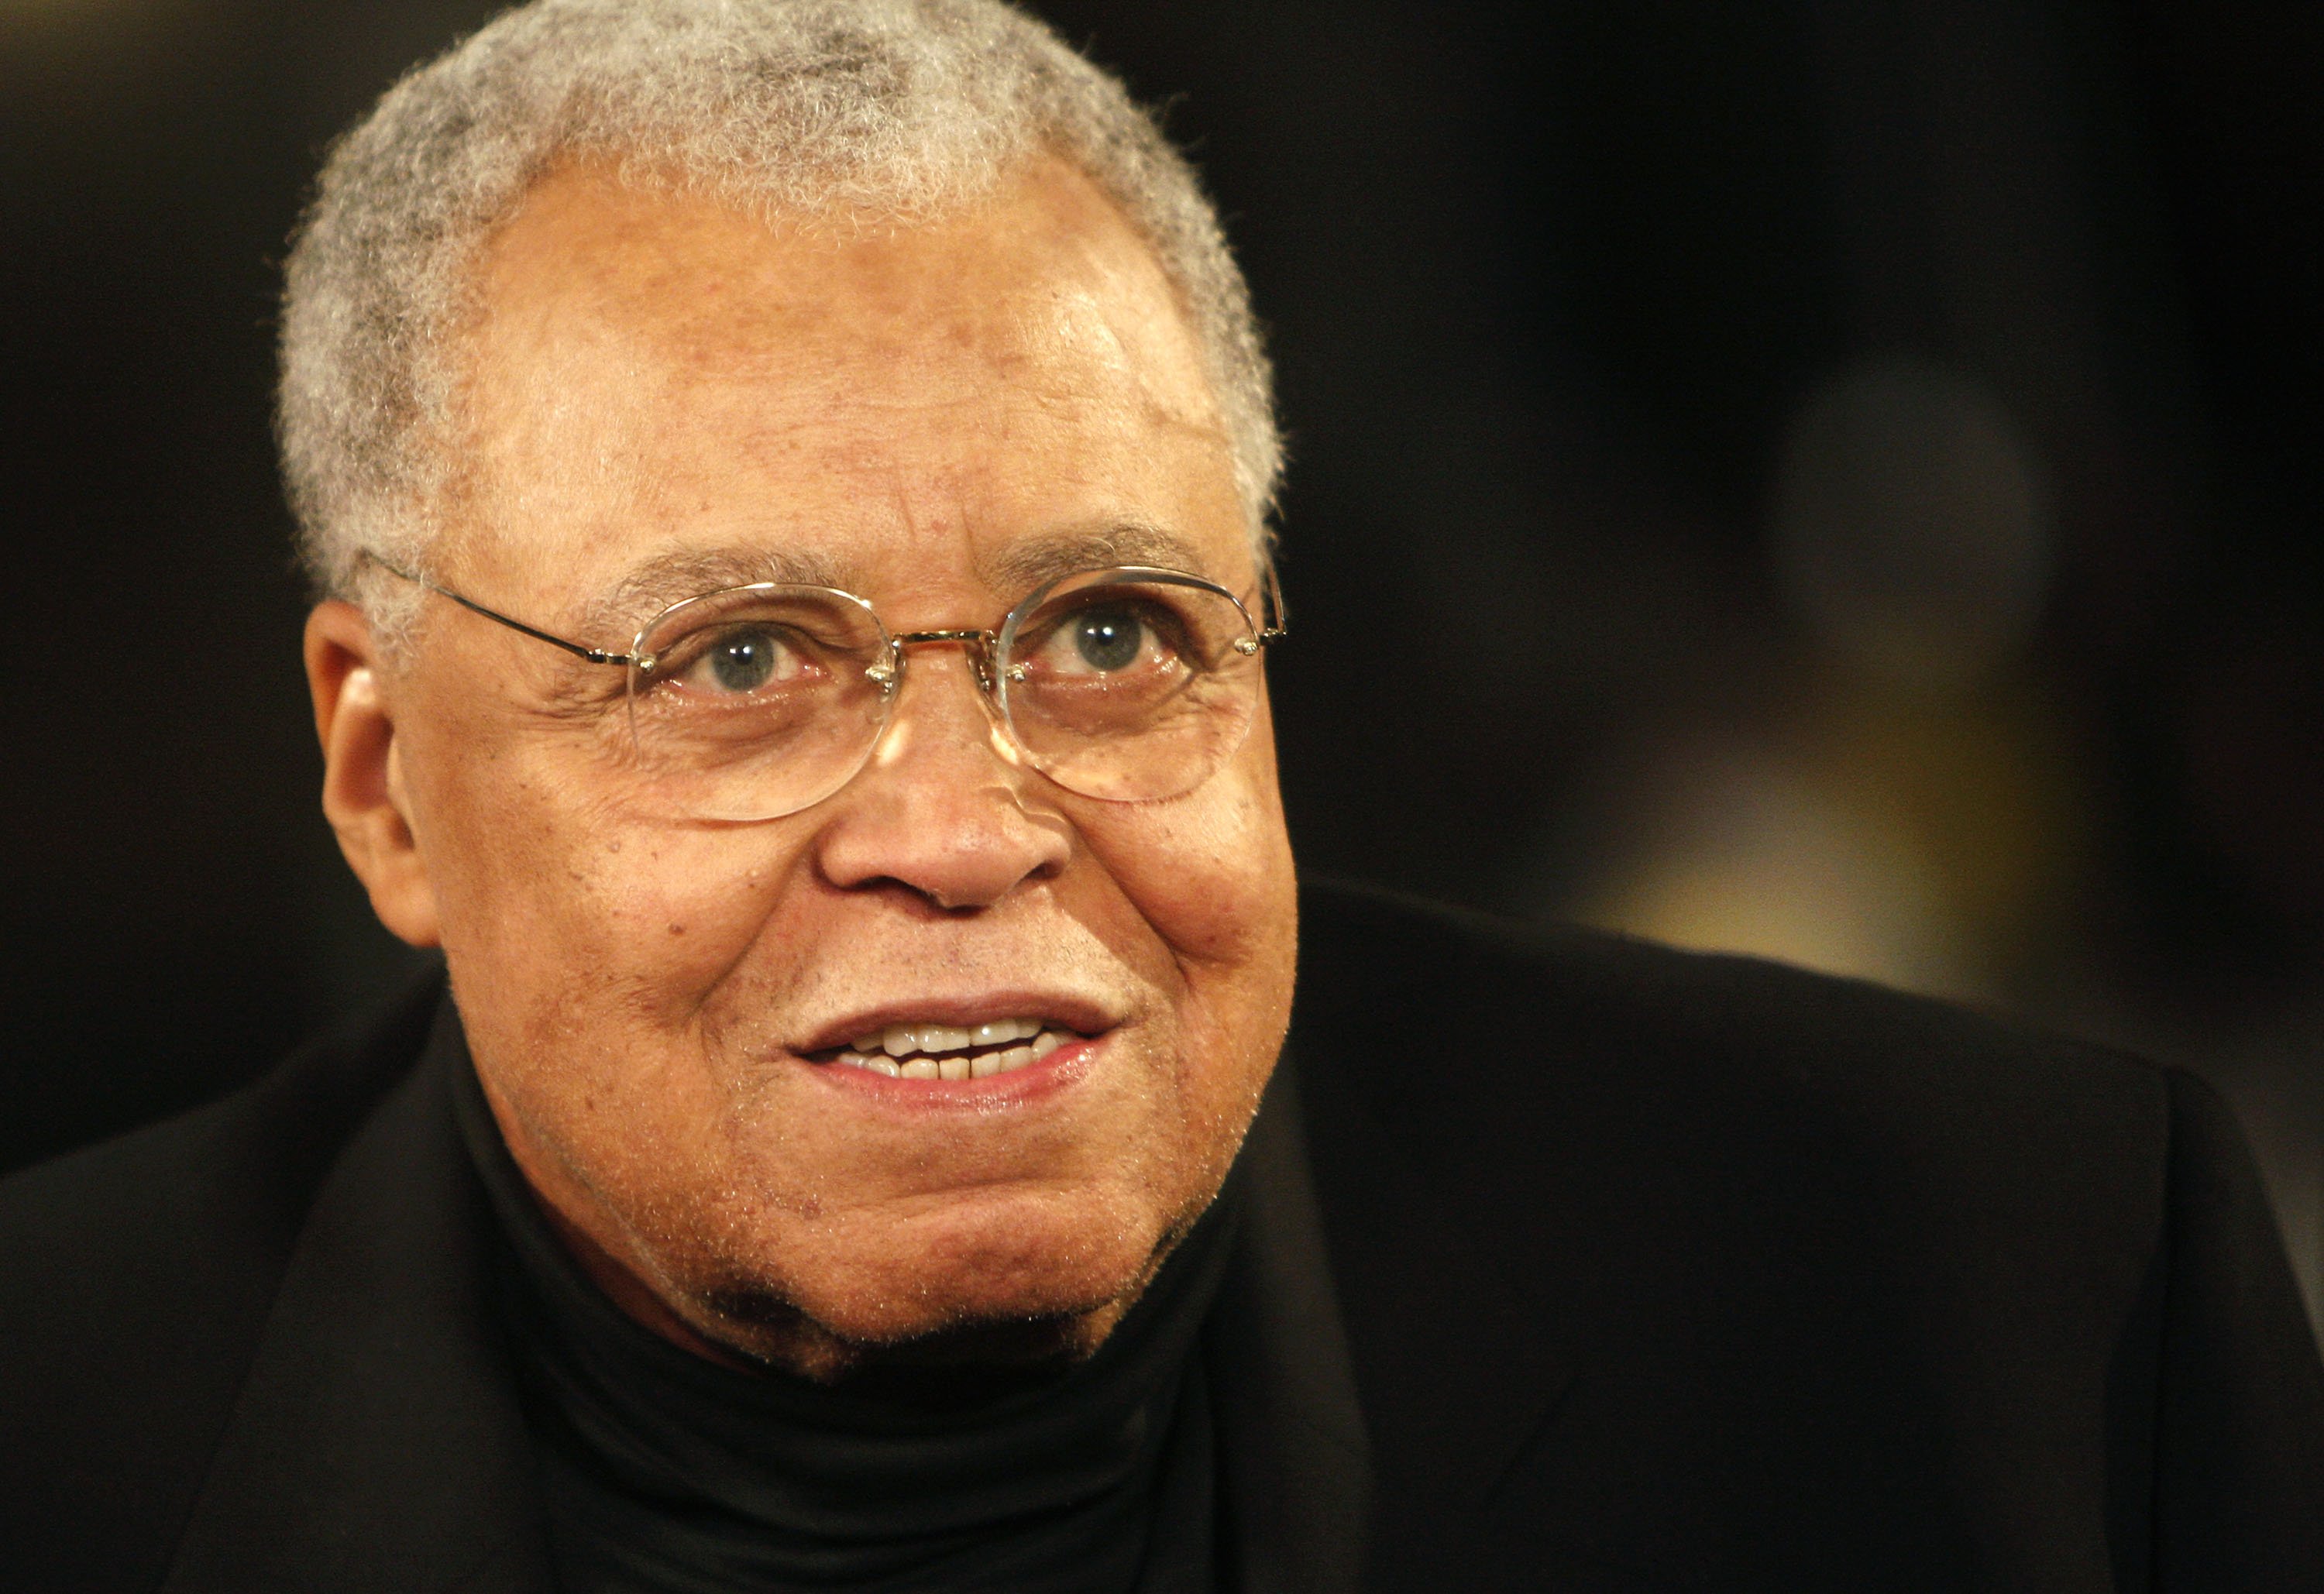  James Earl Jones at rehearsals for the 2009 Screen Actors Guild Awards at the Shrine Auditorium on January 24, 2009 in Los Angeles, California | Photo: Getty Images